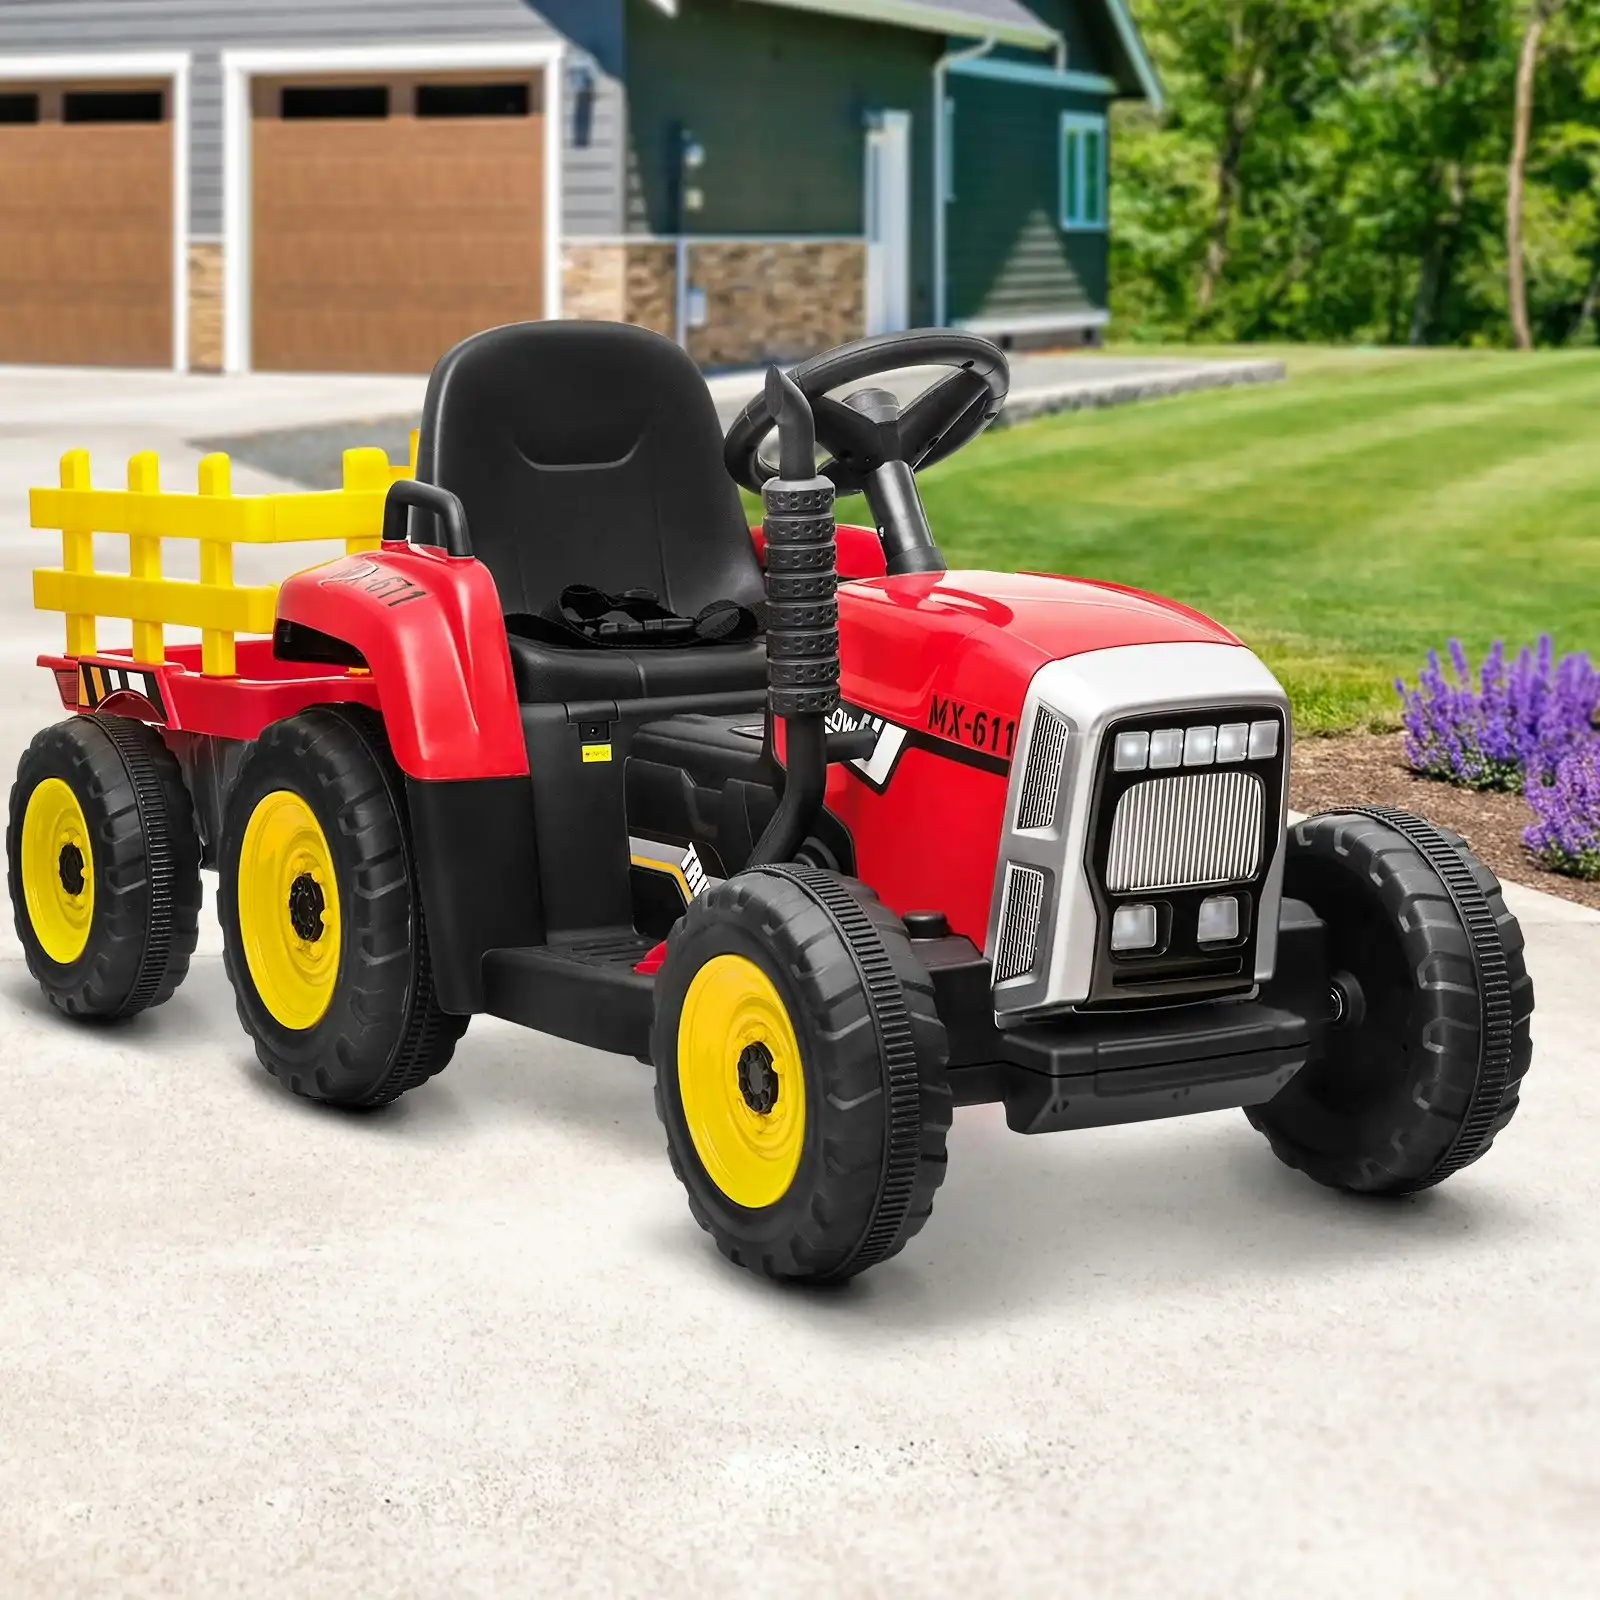 Mazam Kids Ride On Tractor W/ Trailer Electric Vehicle Toy Car Bluetooth Gift